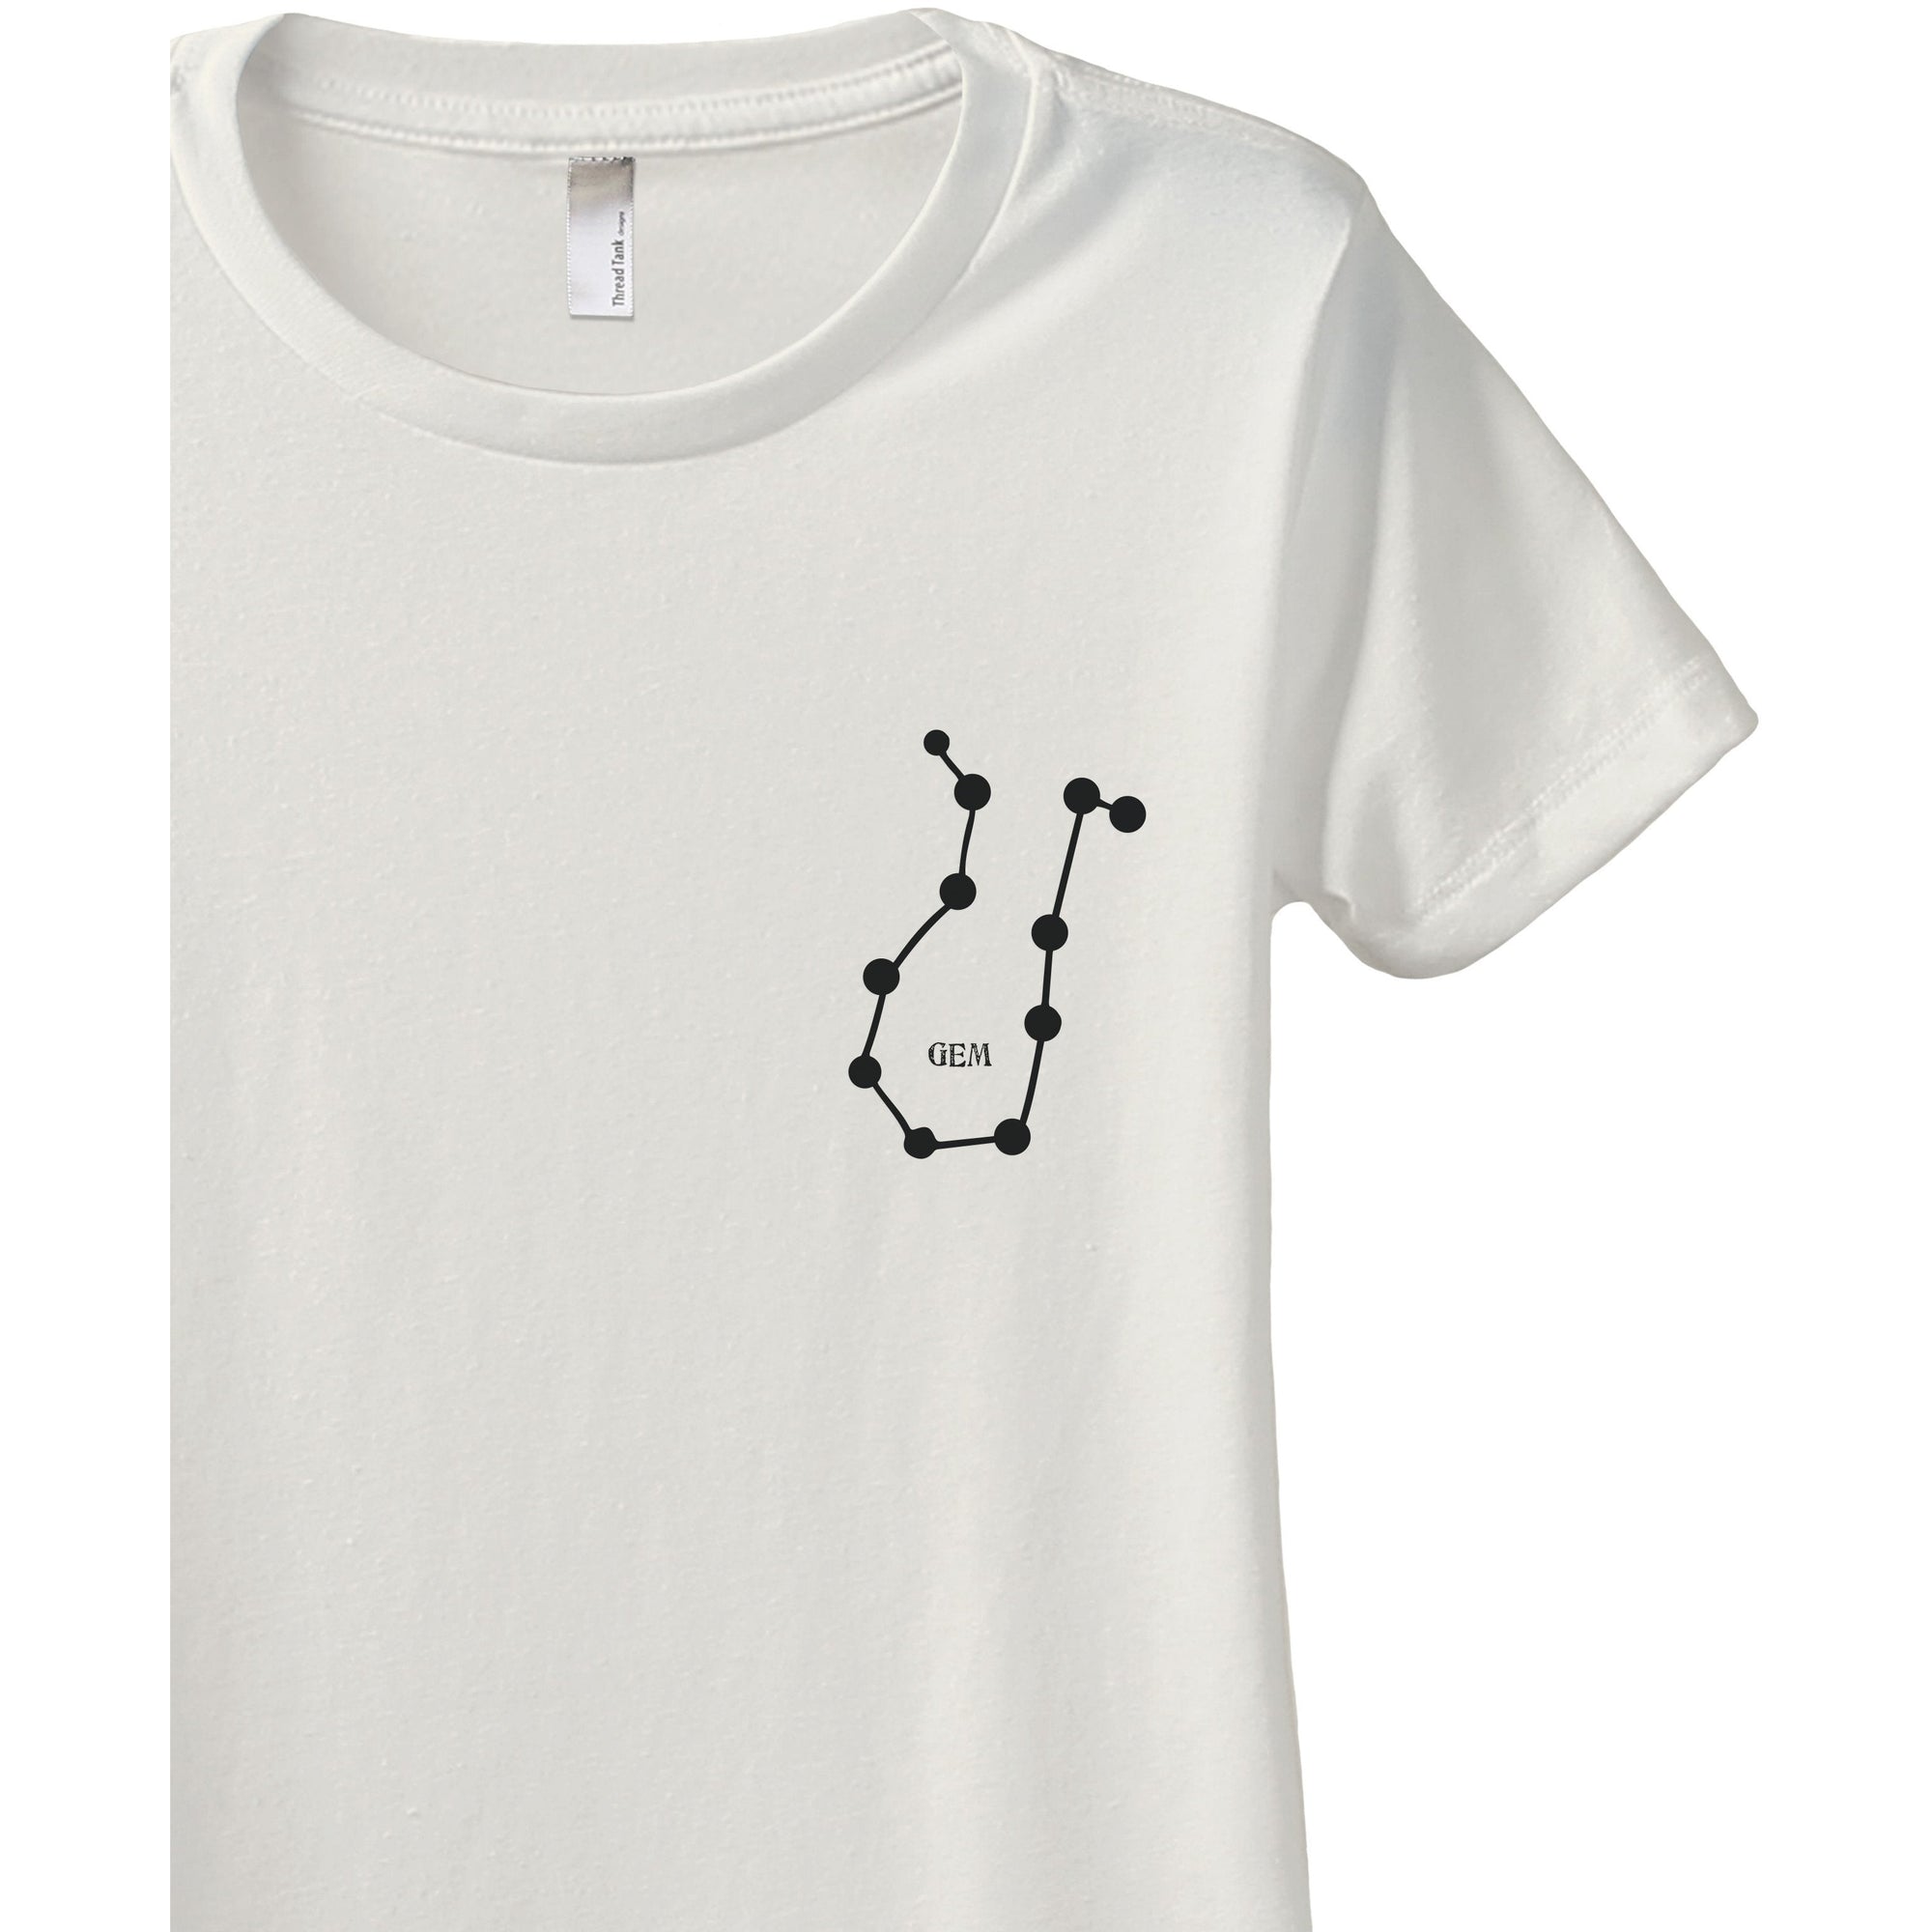 Gemini GEM Constellation Astrology Women's Relaxed Crewneck T-Shirt Top Tee Vintage White Zoom Details
